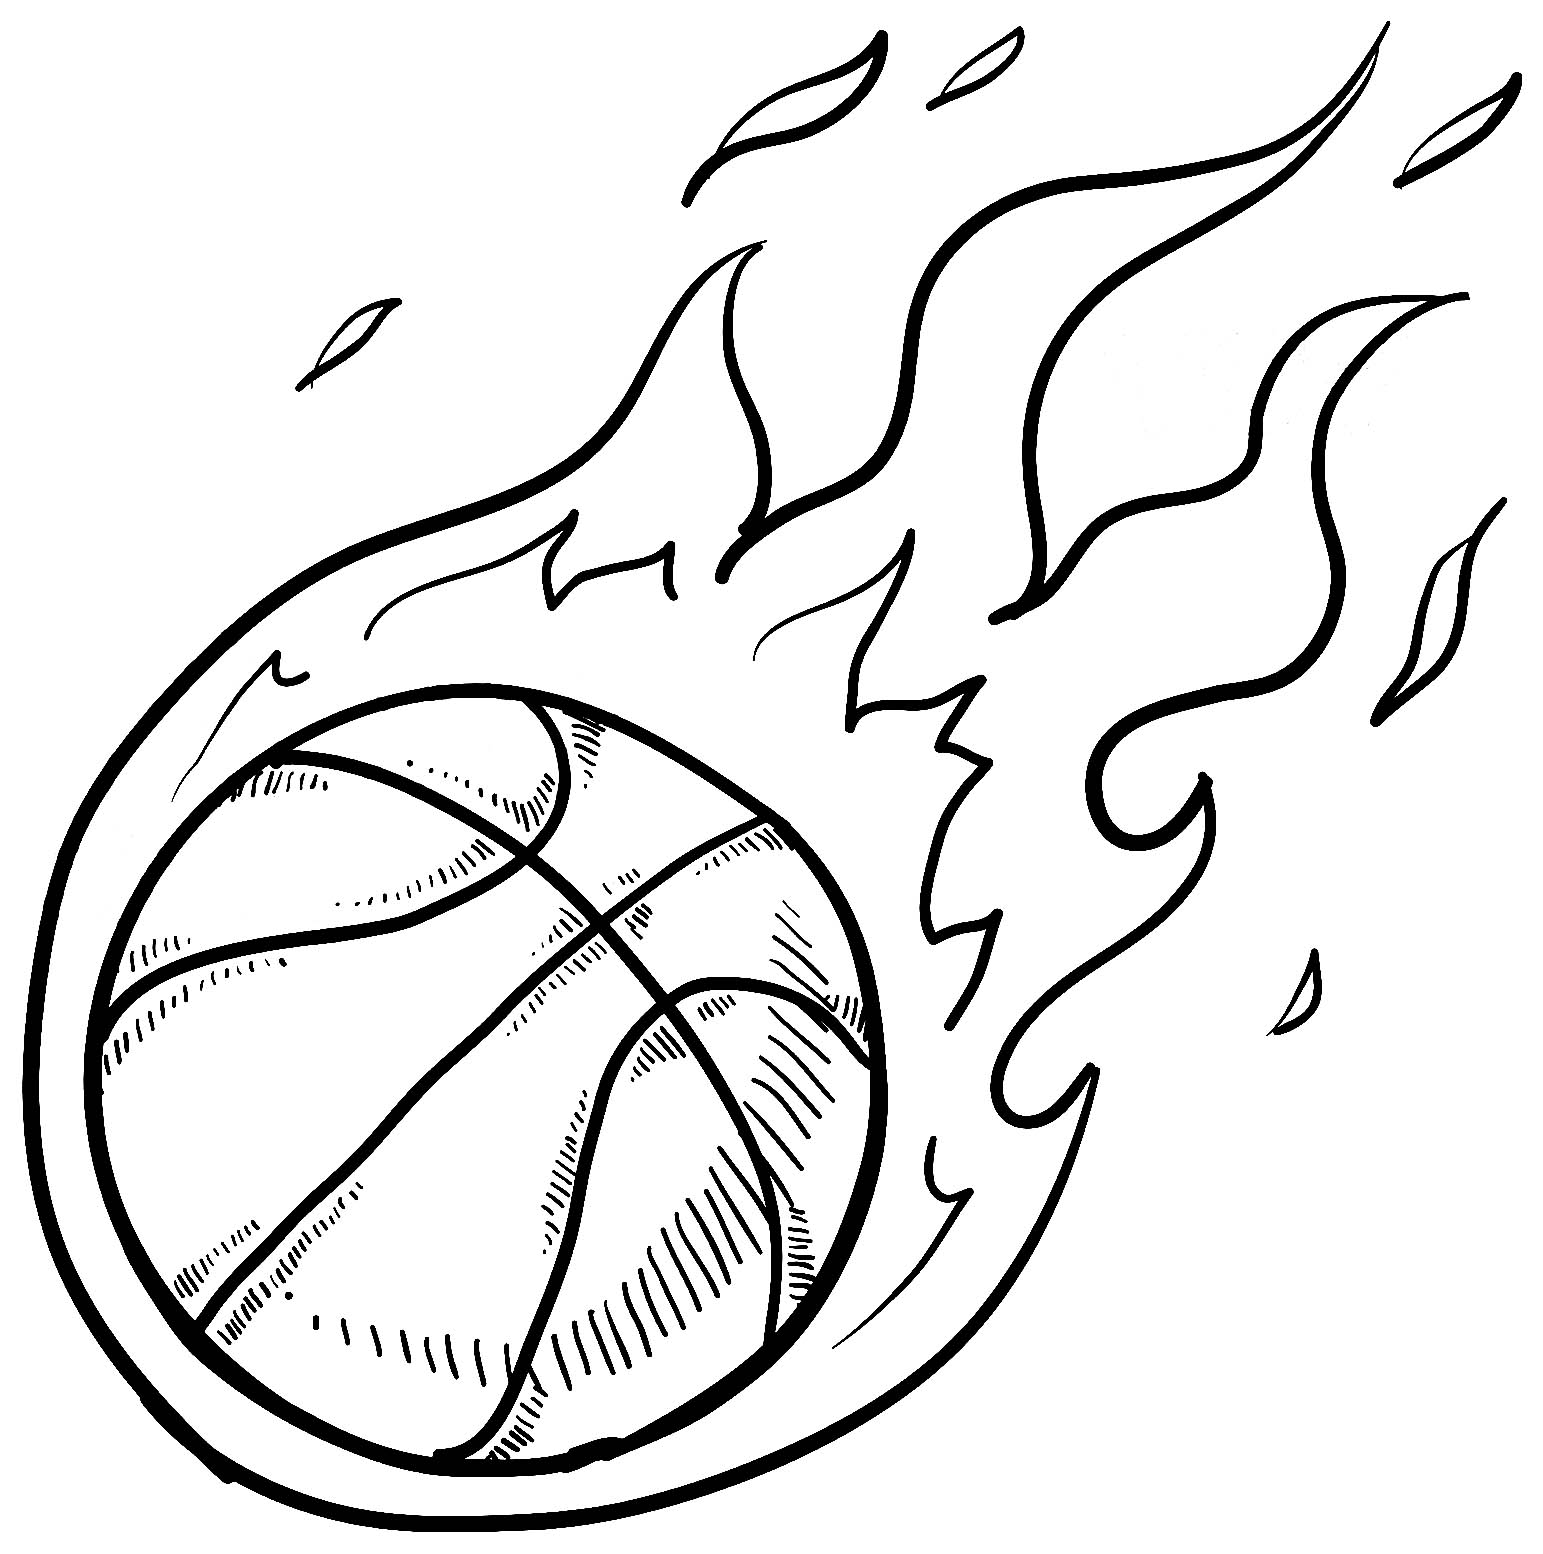 Download Basketball to color for kids - Basketball Kids Coloring Pages